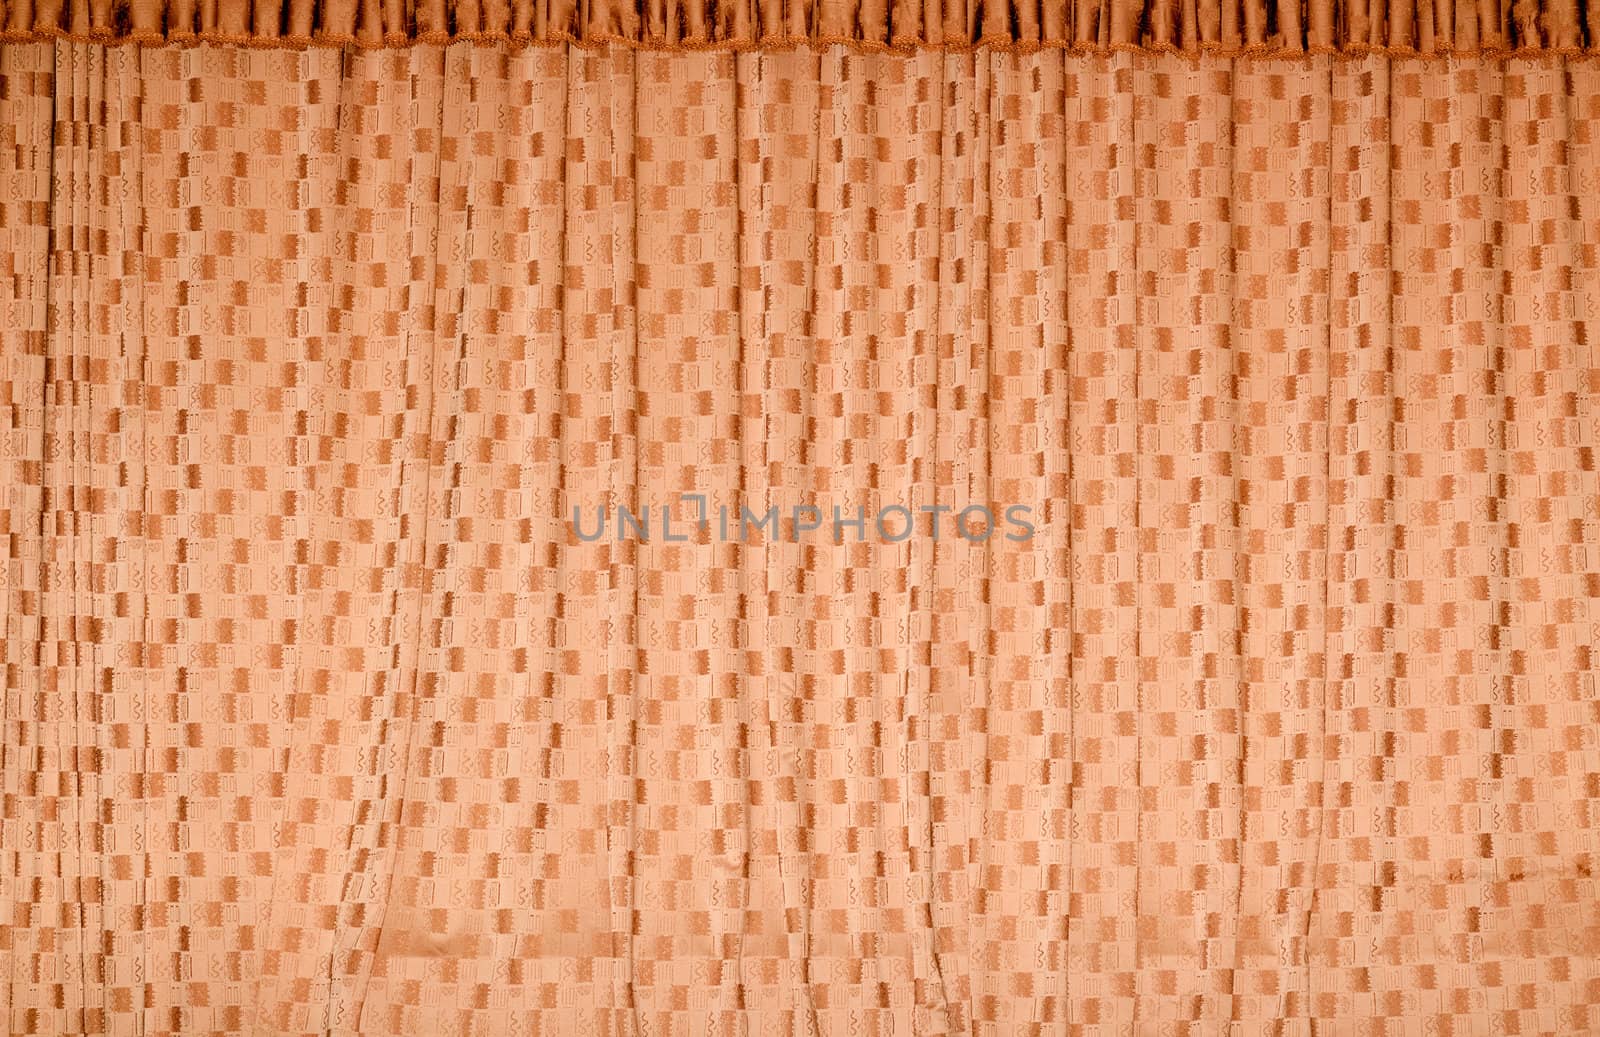 large theater curtain fabric with pleats and pattern